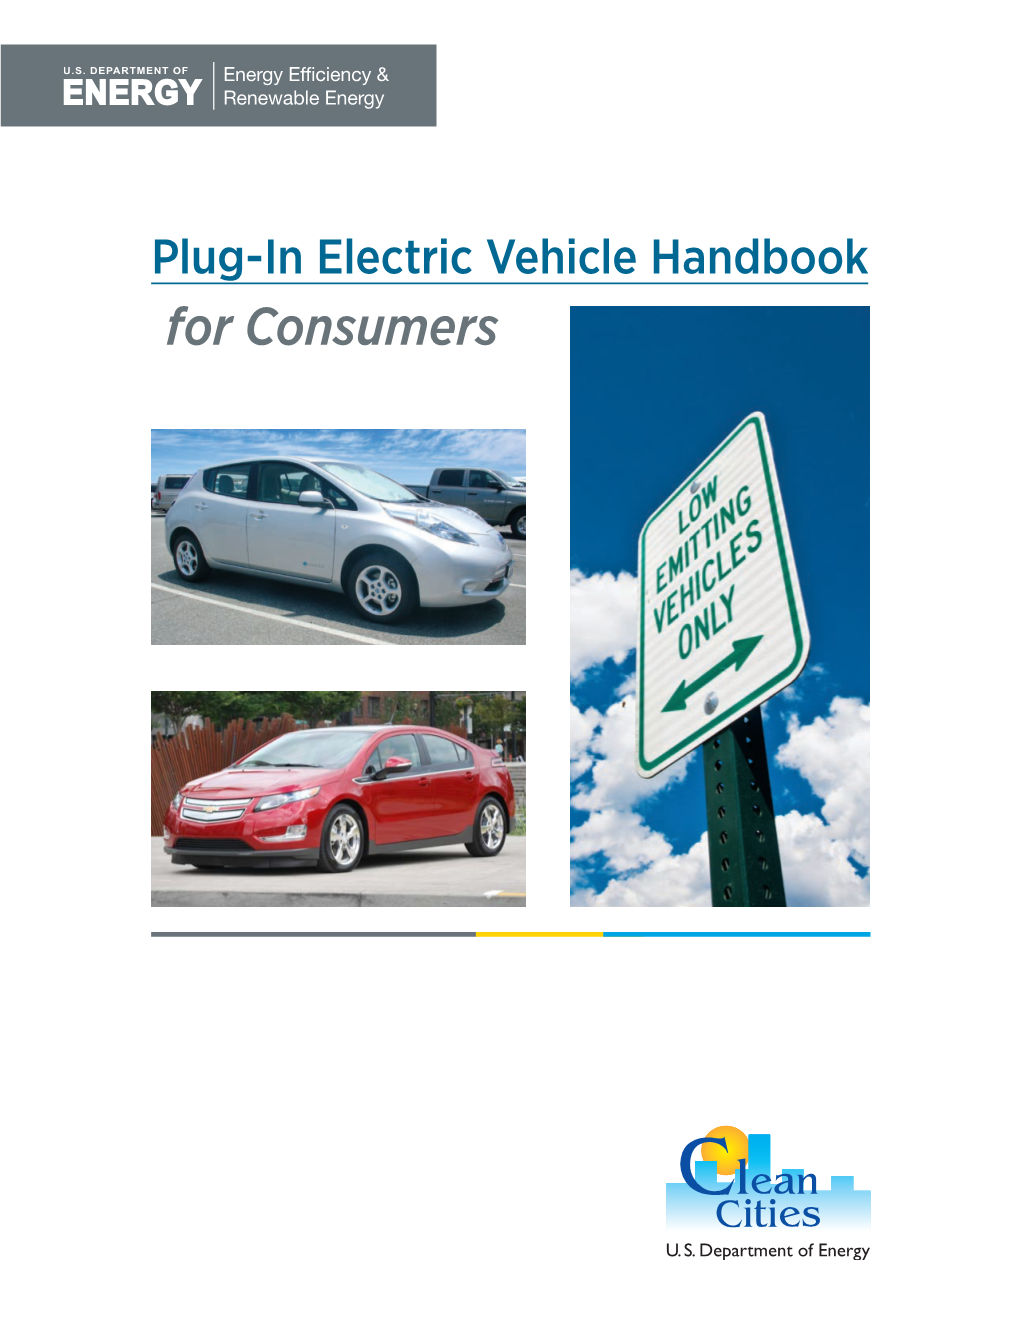 Plug-In Electric Vehicle Handbook for Consumers 2 Plug-In Electric Vehicle Handbook for Consumers